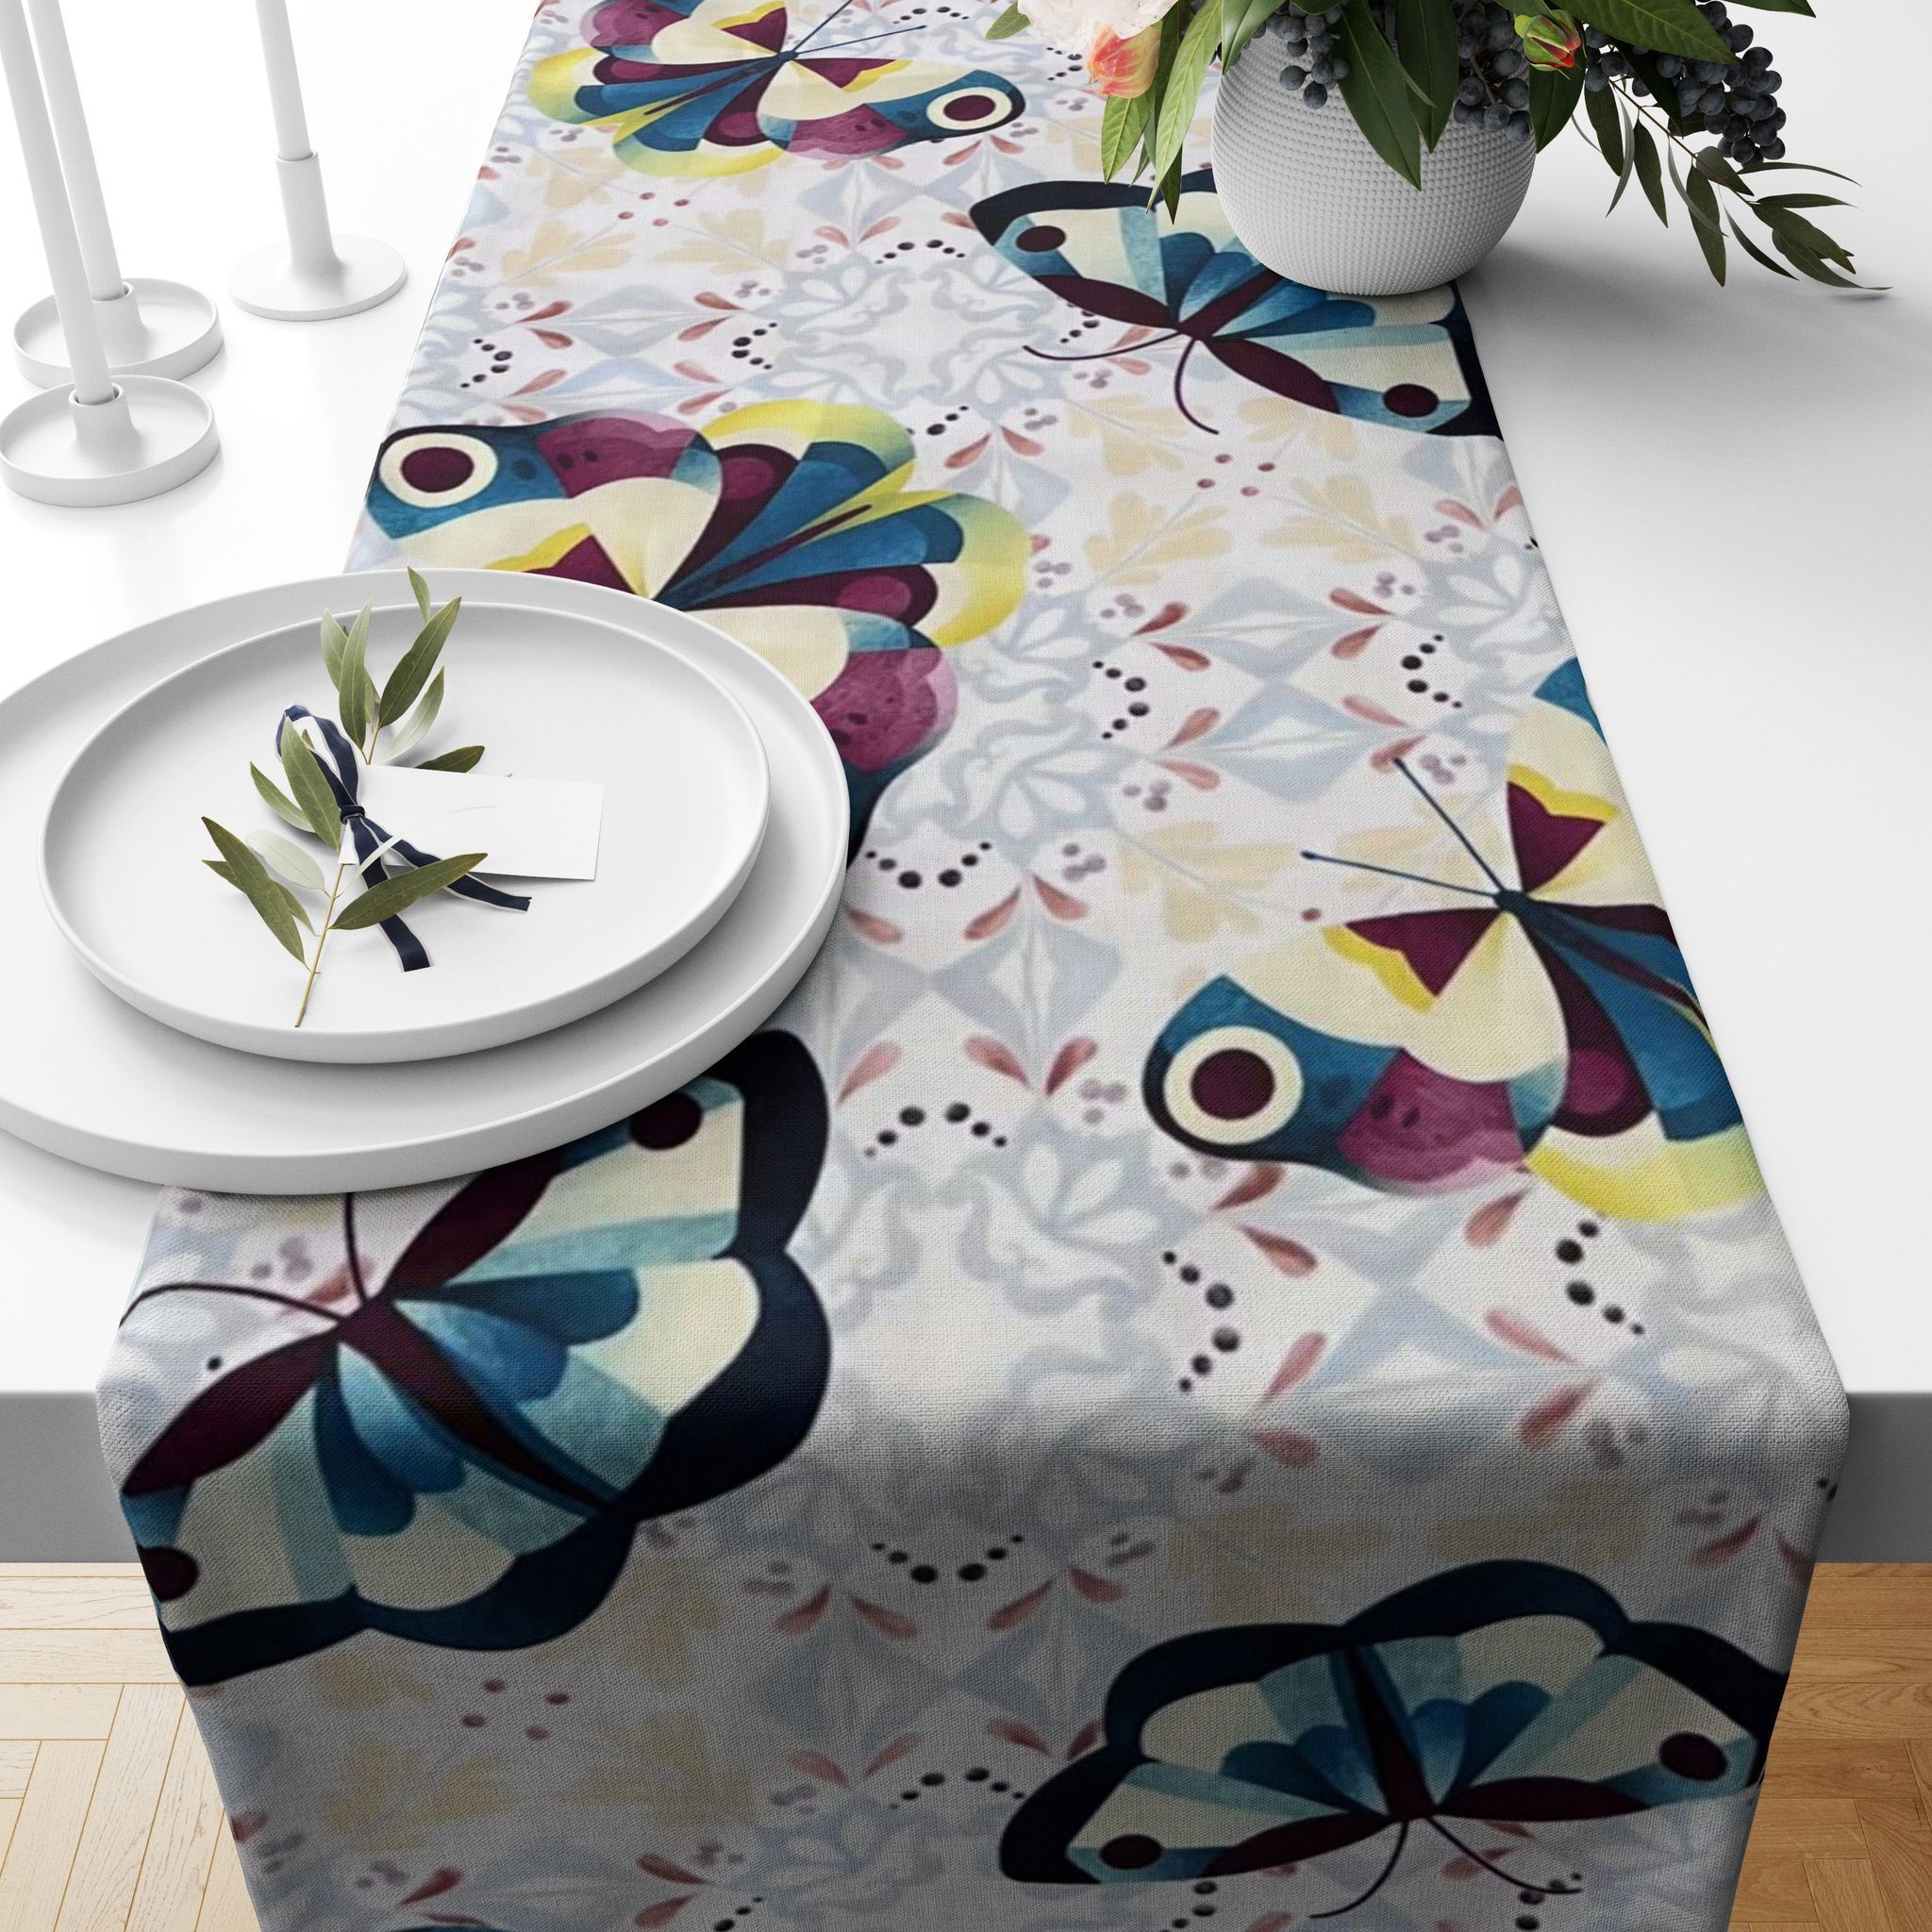 Ecstasy butterfly Table Runner (13in x 58in or 13in x 72in)